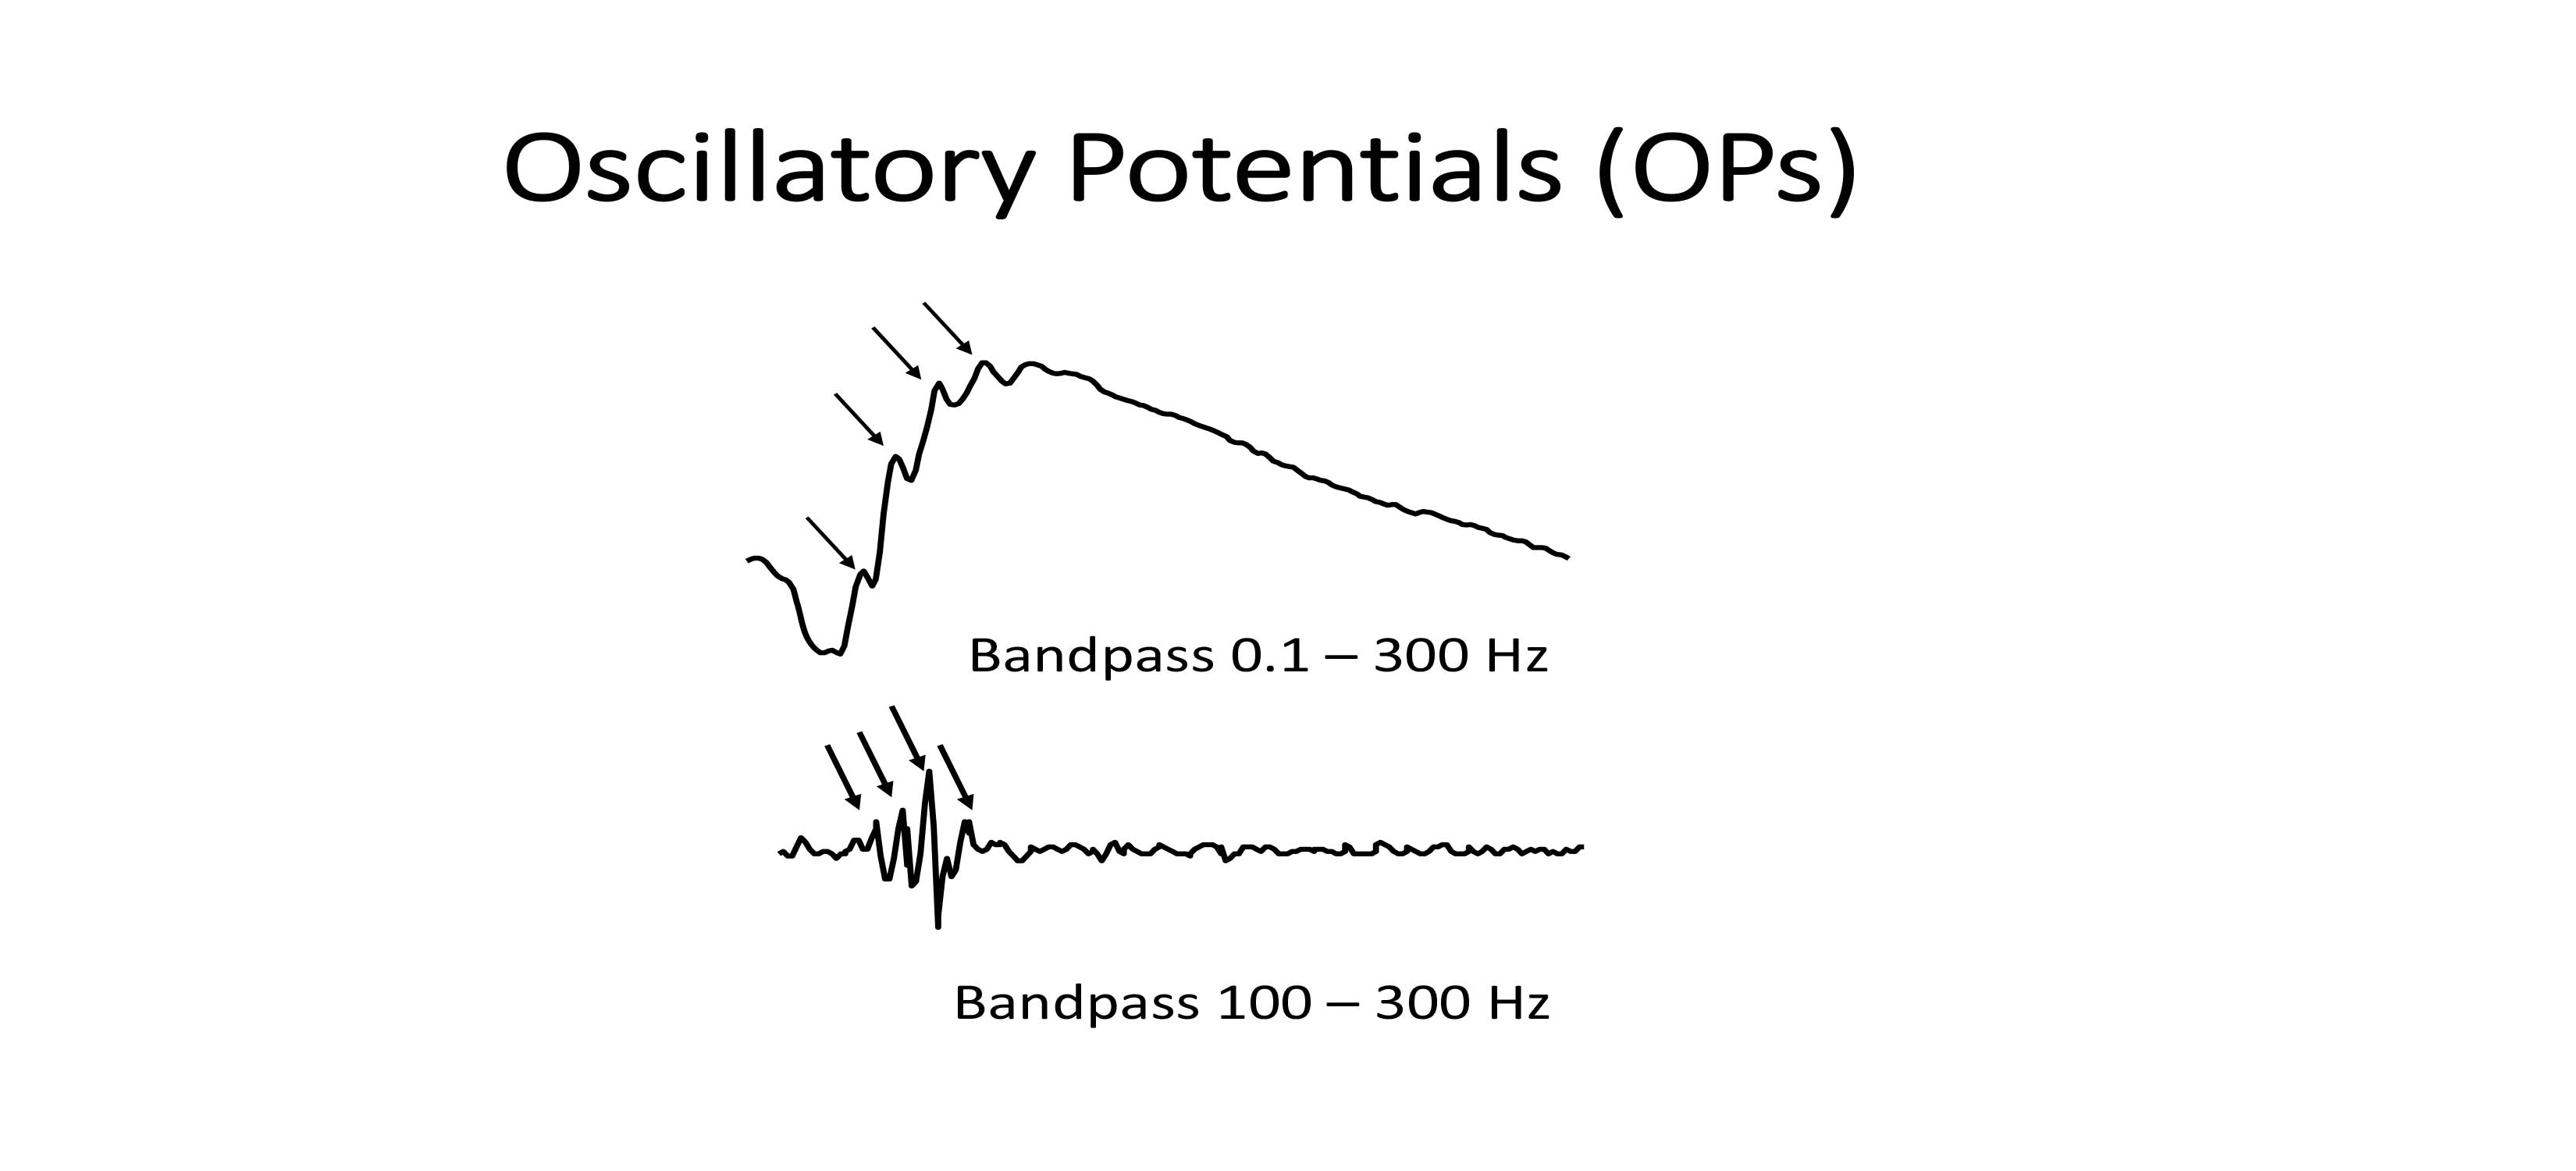 Illustration of oscillatory potentials (arrows) isolated by changing the bandpass filter used for recording the ERG